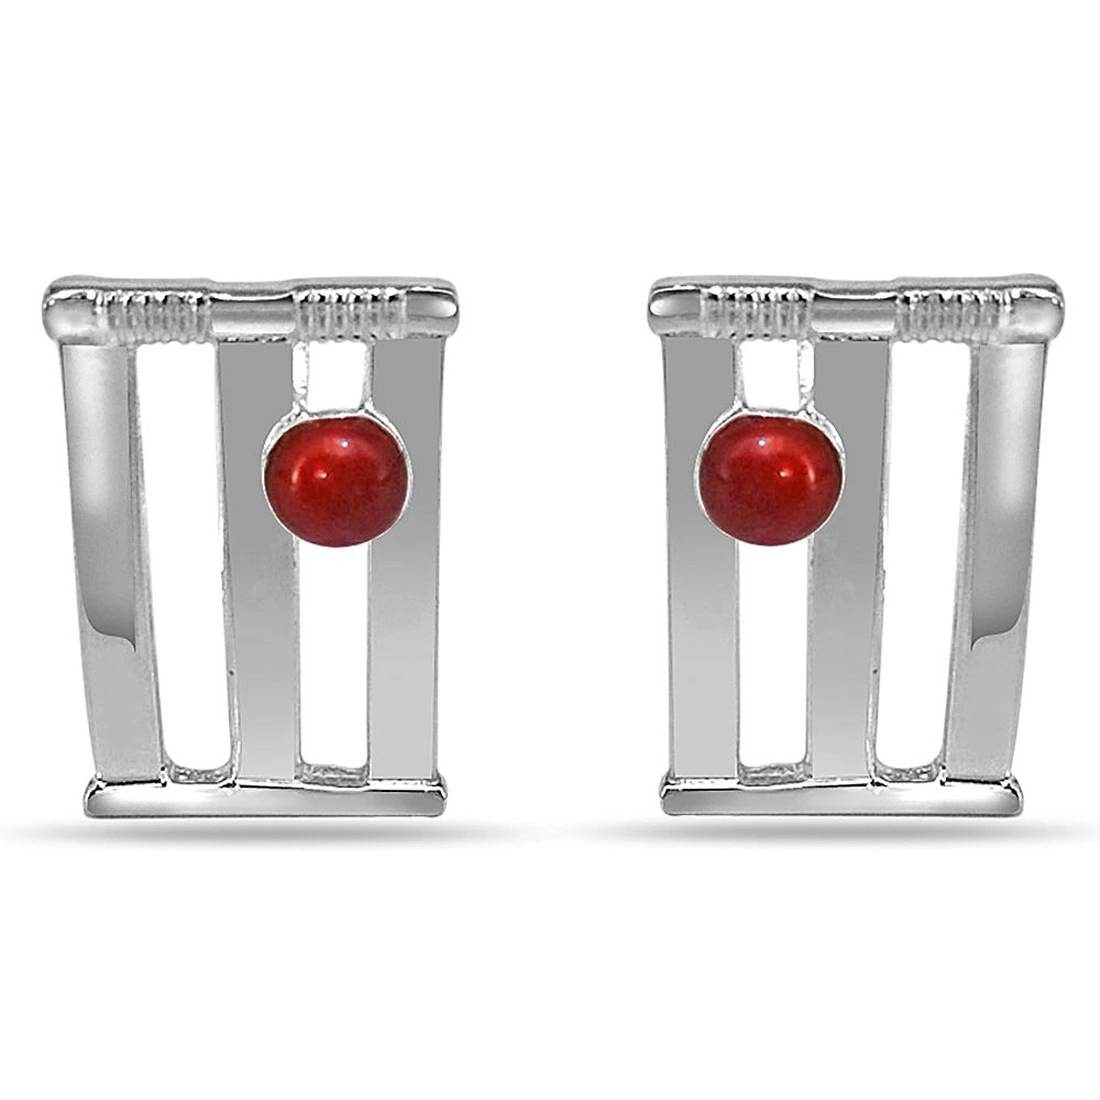 Cricket Stumps and Ball Cufflinks in Sterling Silver for Men (SDS140)